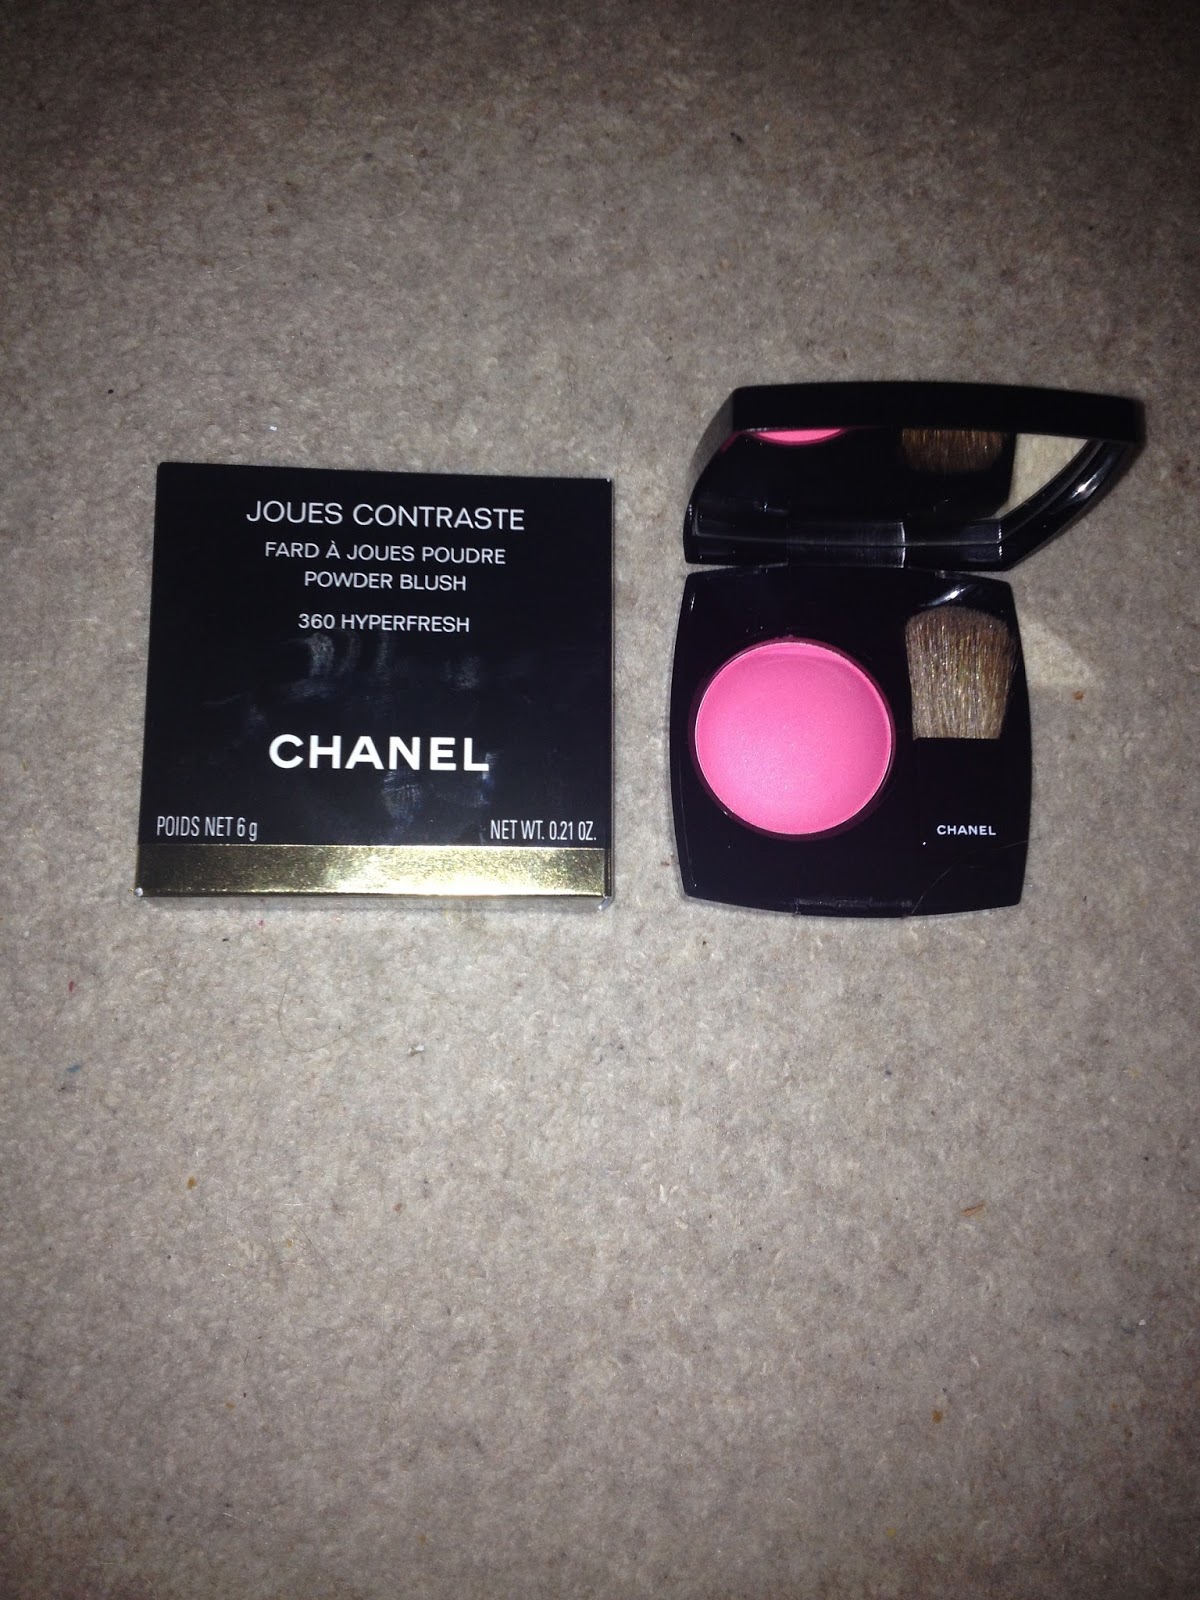 The Makeup Junkie's Diary: Chanel Joues Contraste Powder Blush